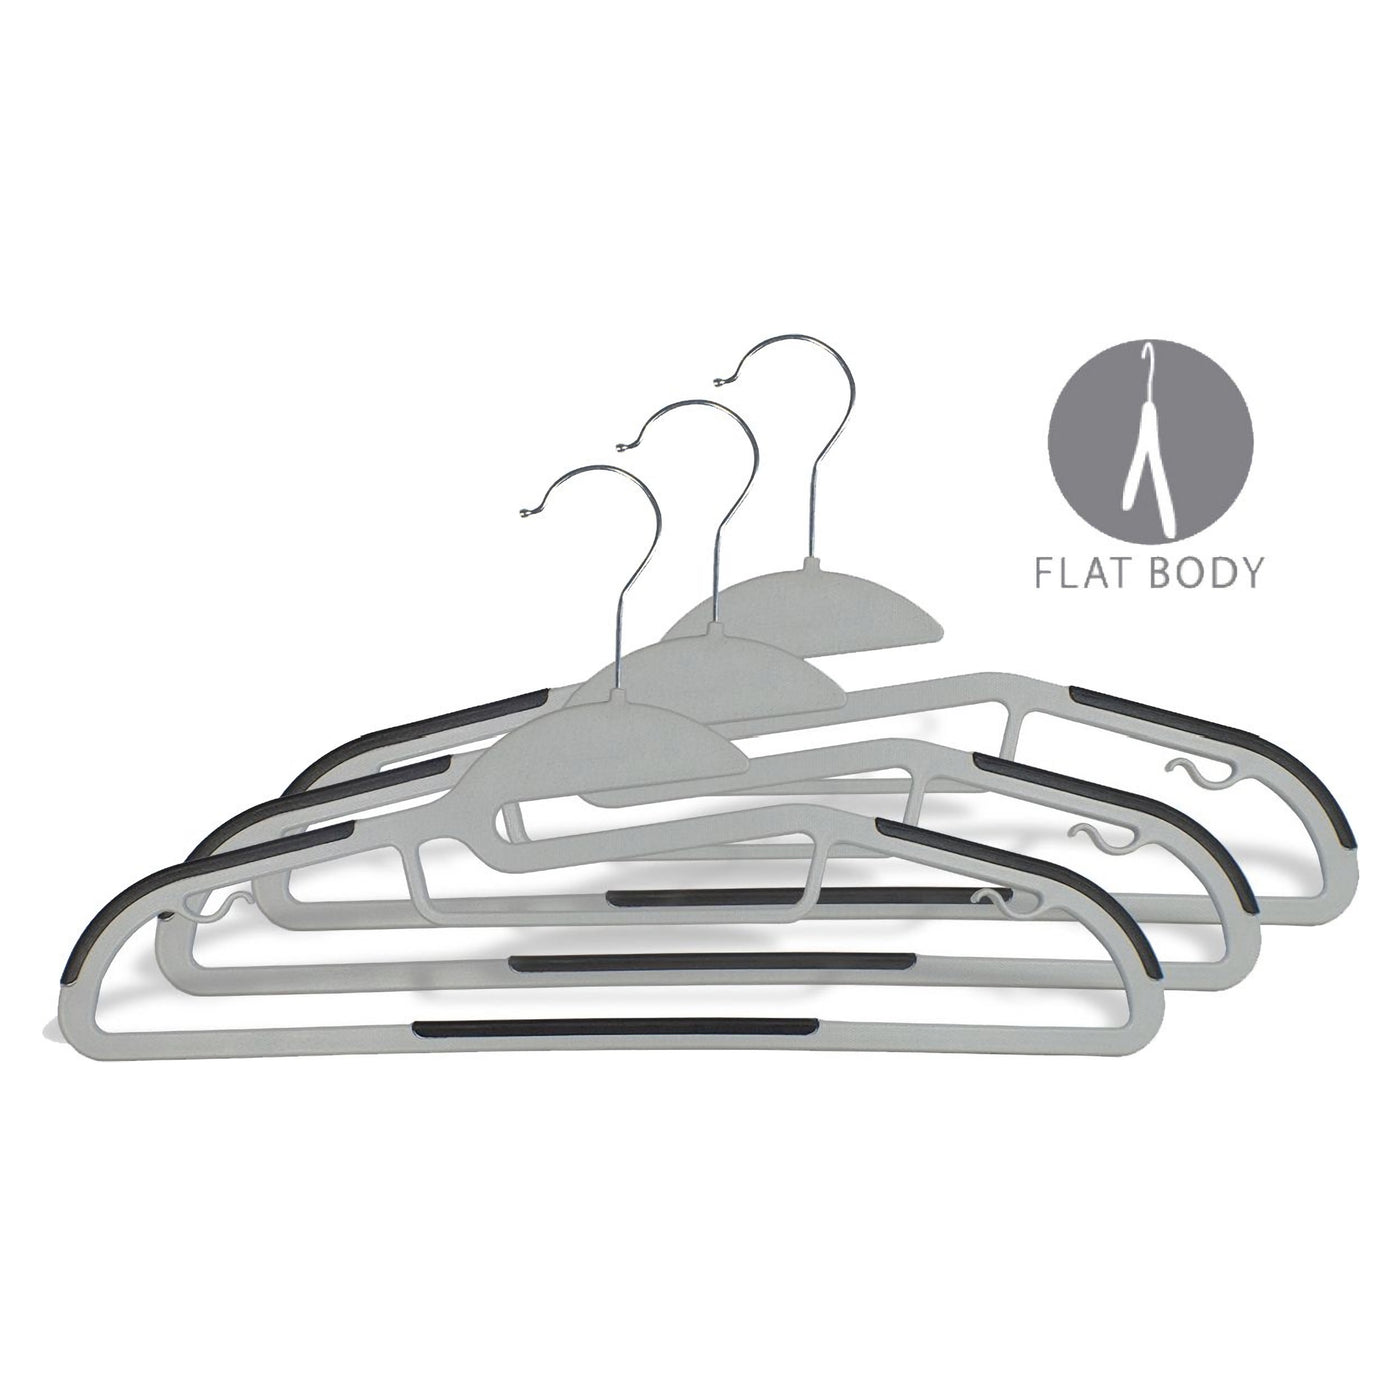 TIMMY Hangers Black Velvet Hangers - Suit Hangers (50-Pack) Ultra Thin  Space Saving Coat Hanger and Heavy Duty Clothes Hangers Hold Up-to 10 Lbs,  for